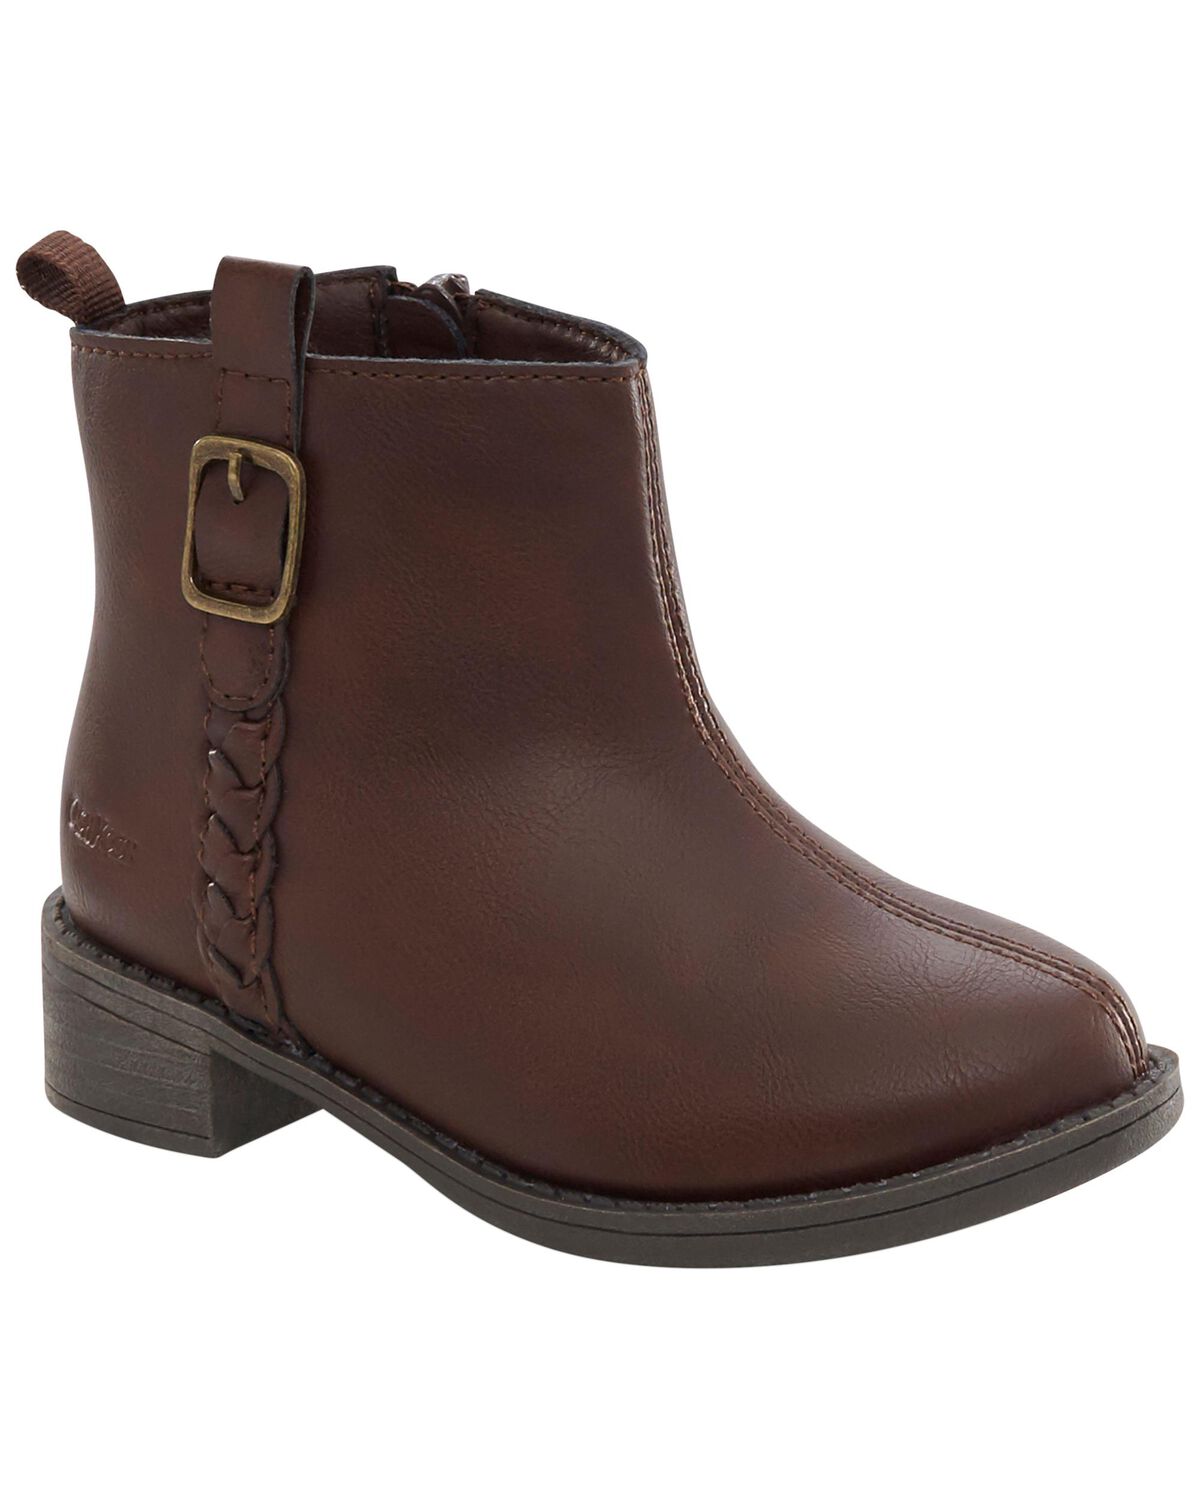 Brown Toddler Slip-On Boots | carters.com